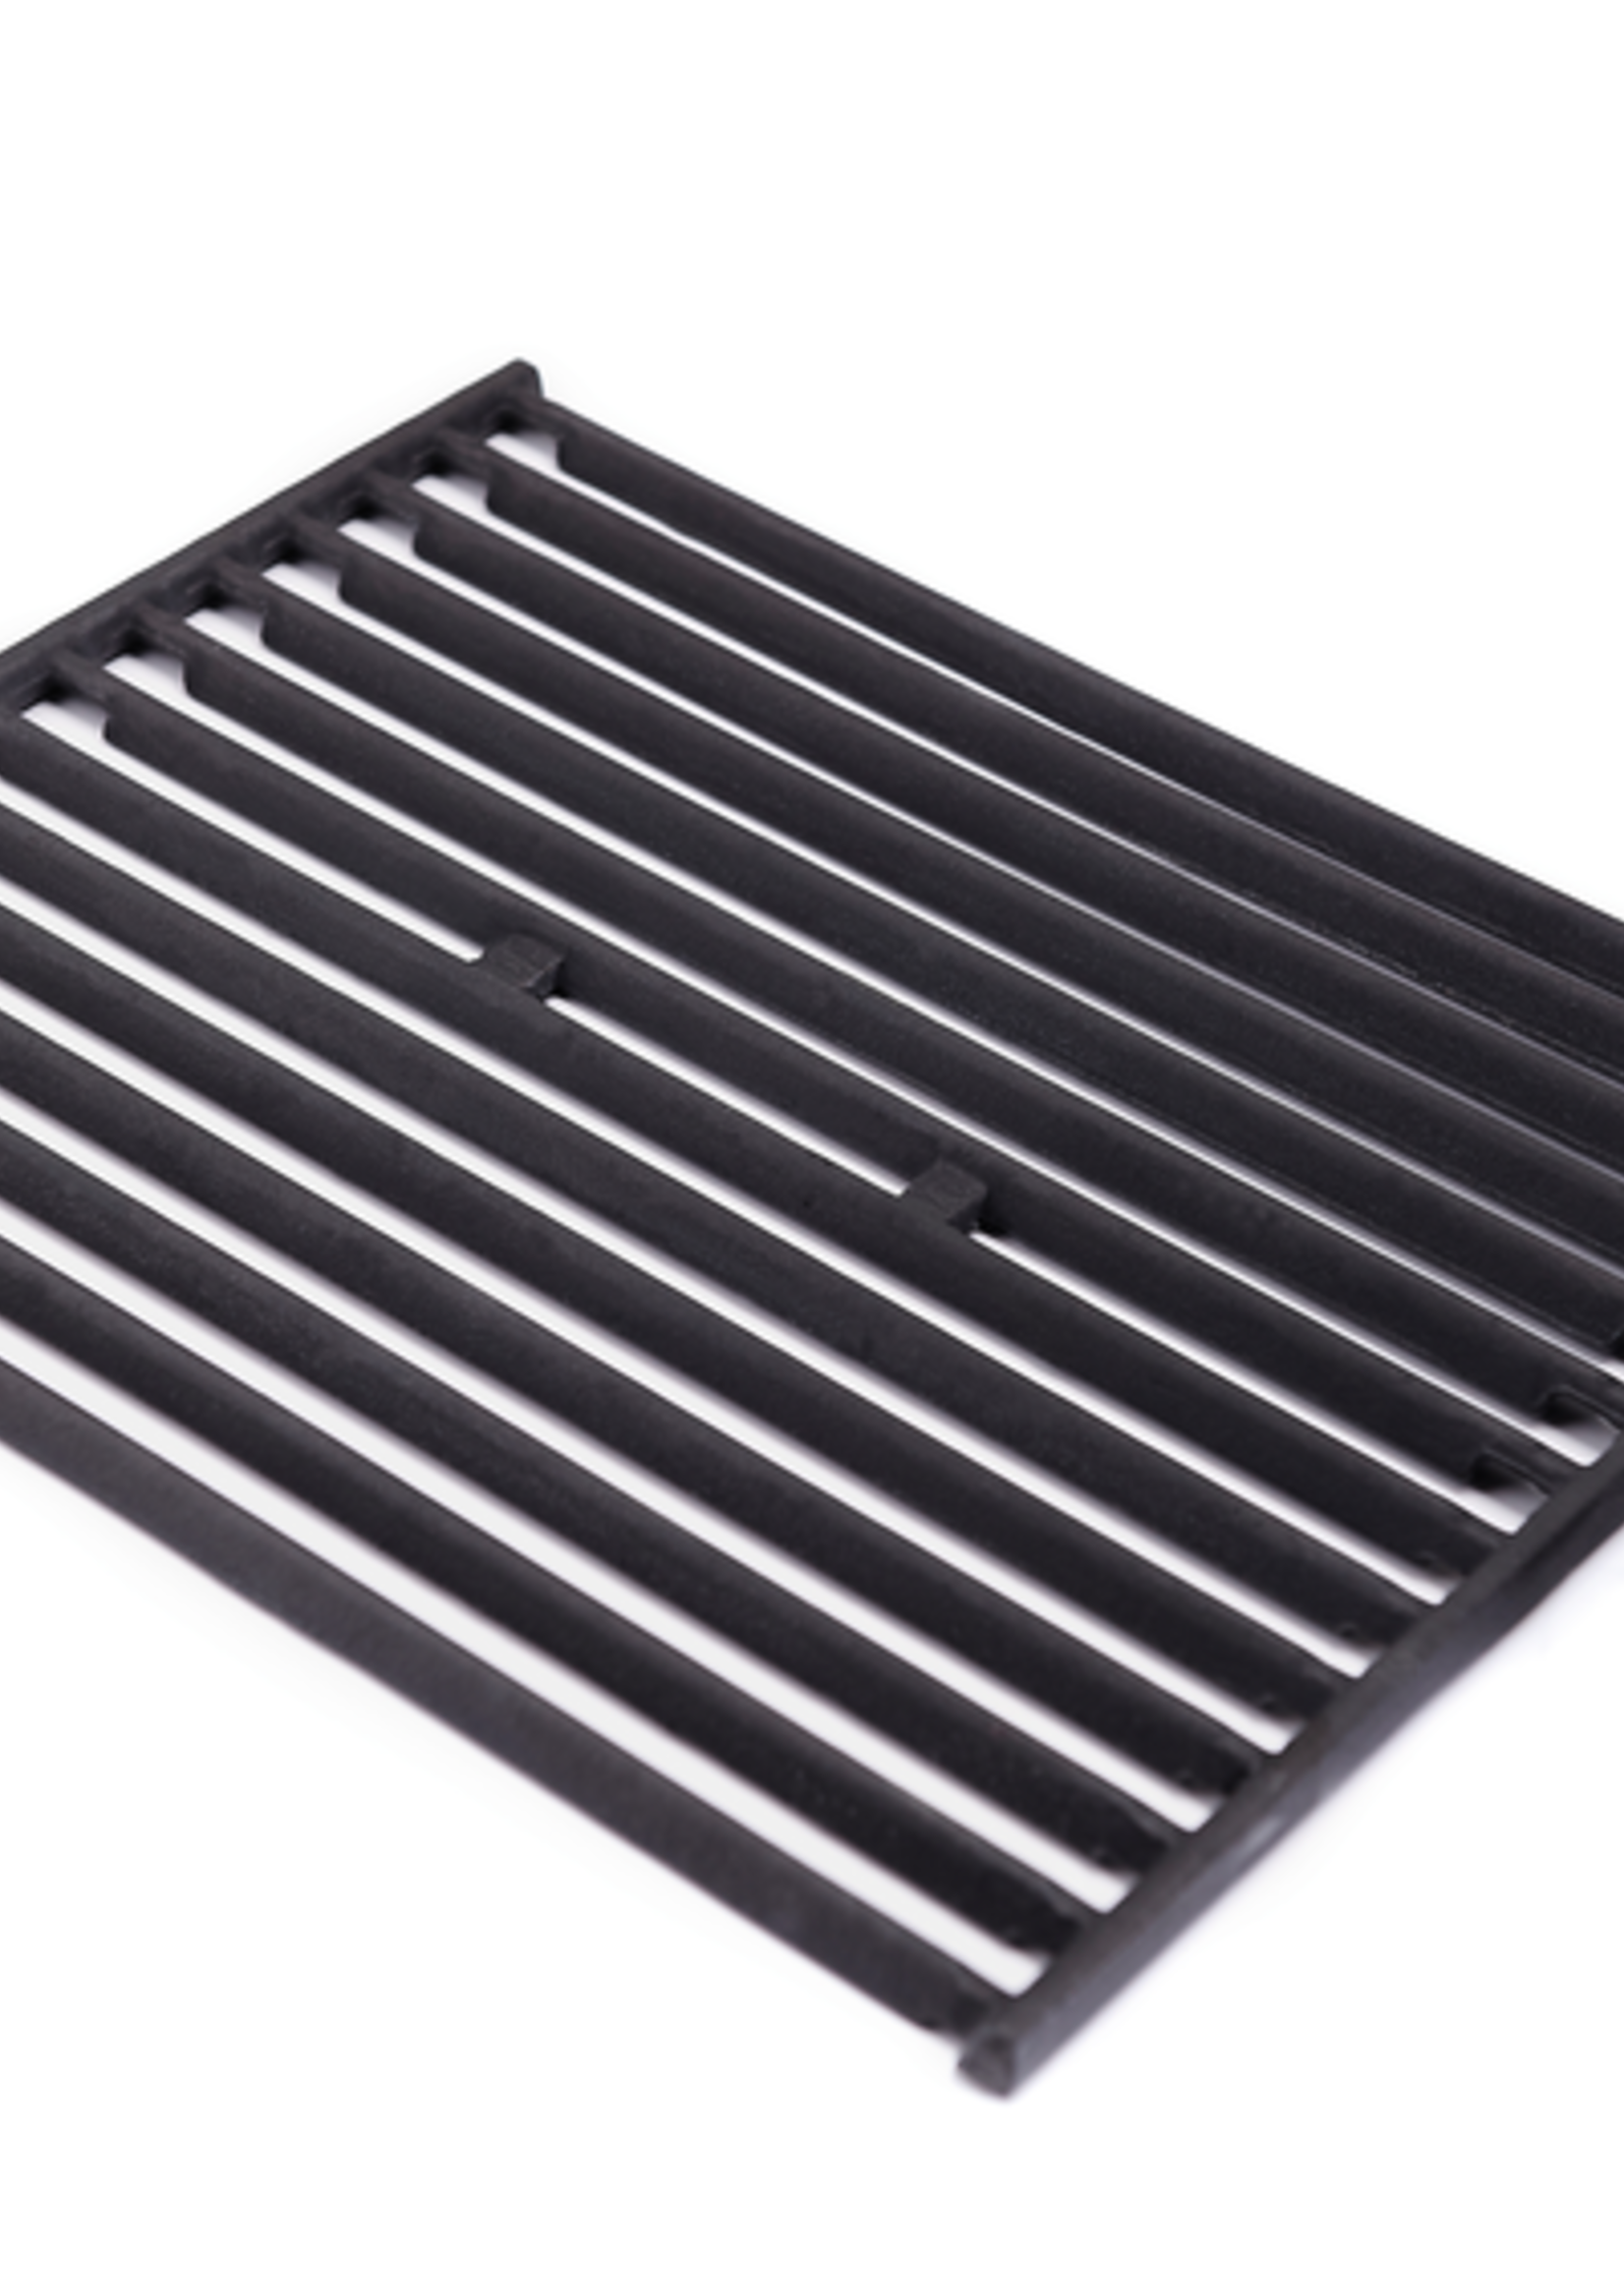 Broil King Broil King Cast Iron Cooking Grids (Signet)